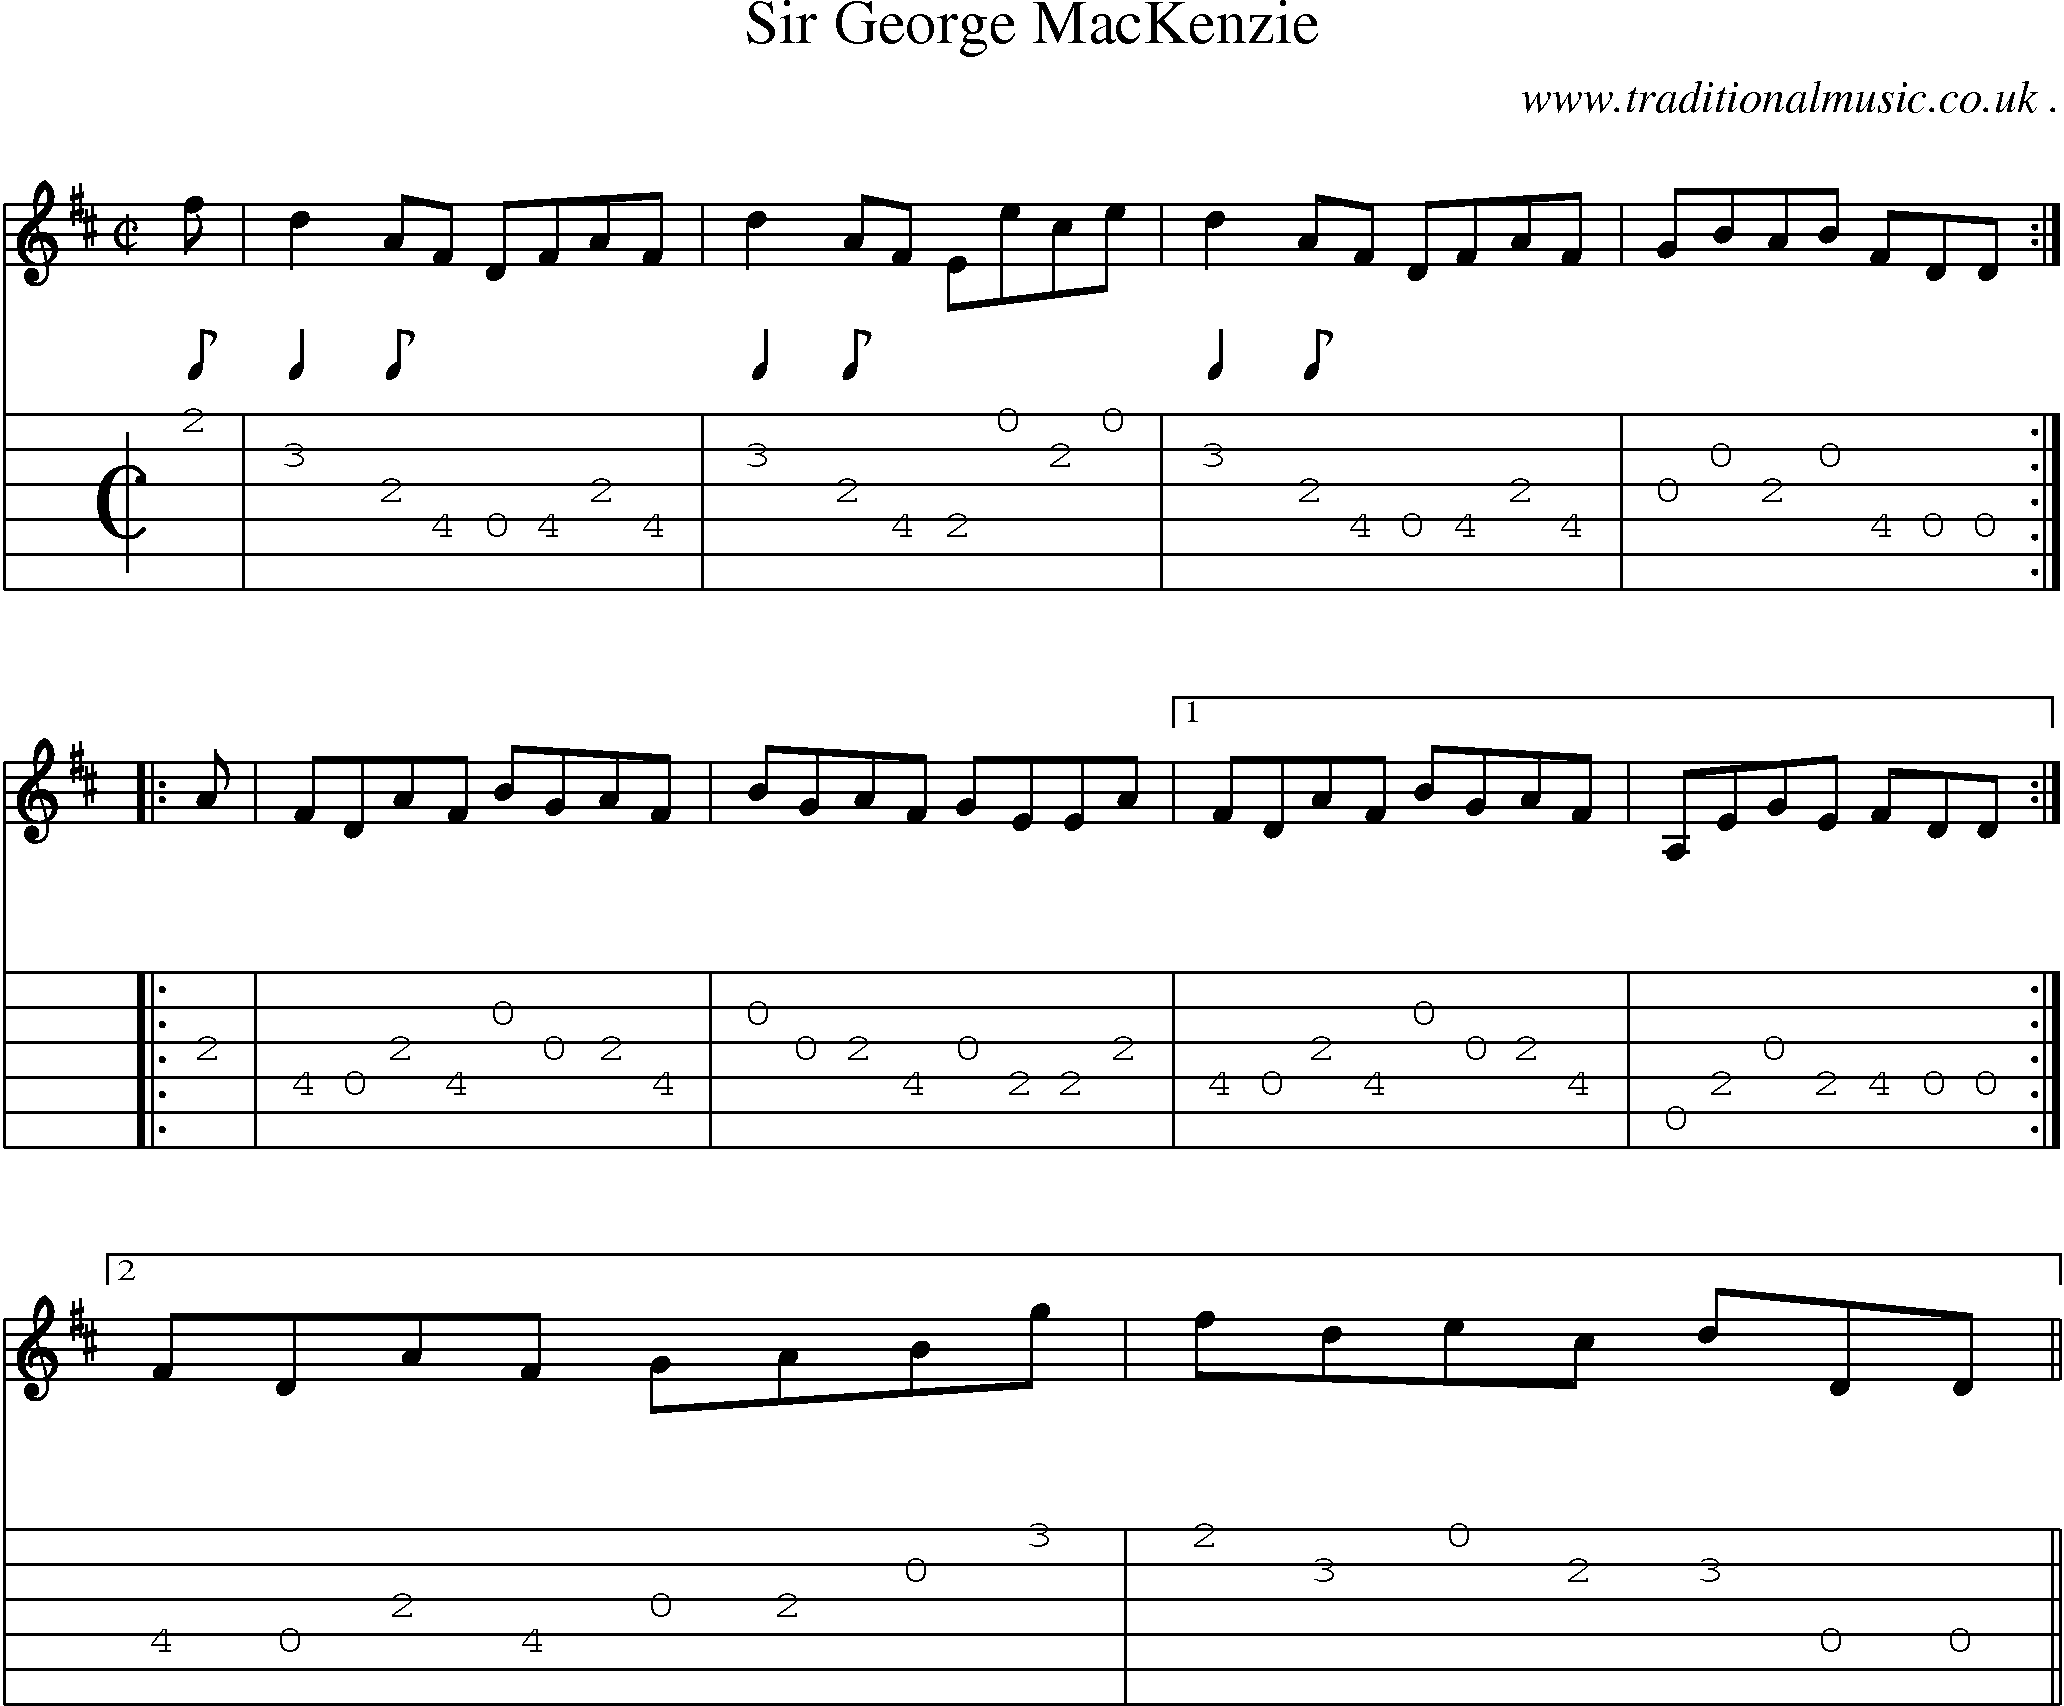 Sheet-music  score, Chords and Guitar Tabs for Sir George Mackenzie